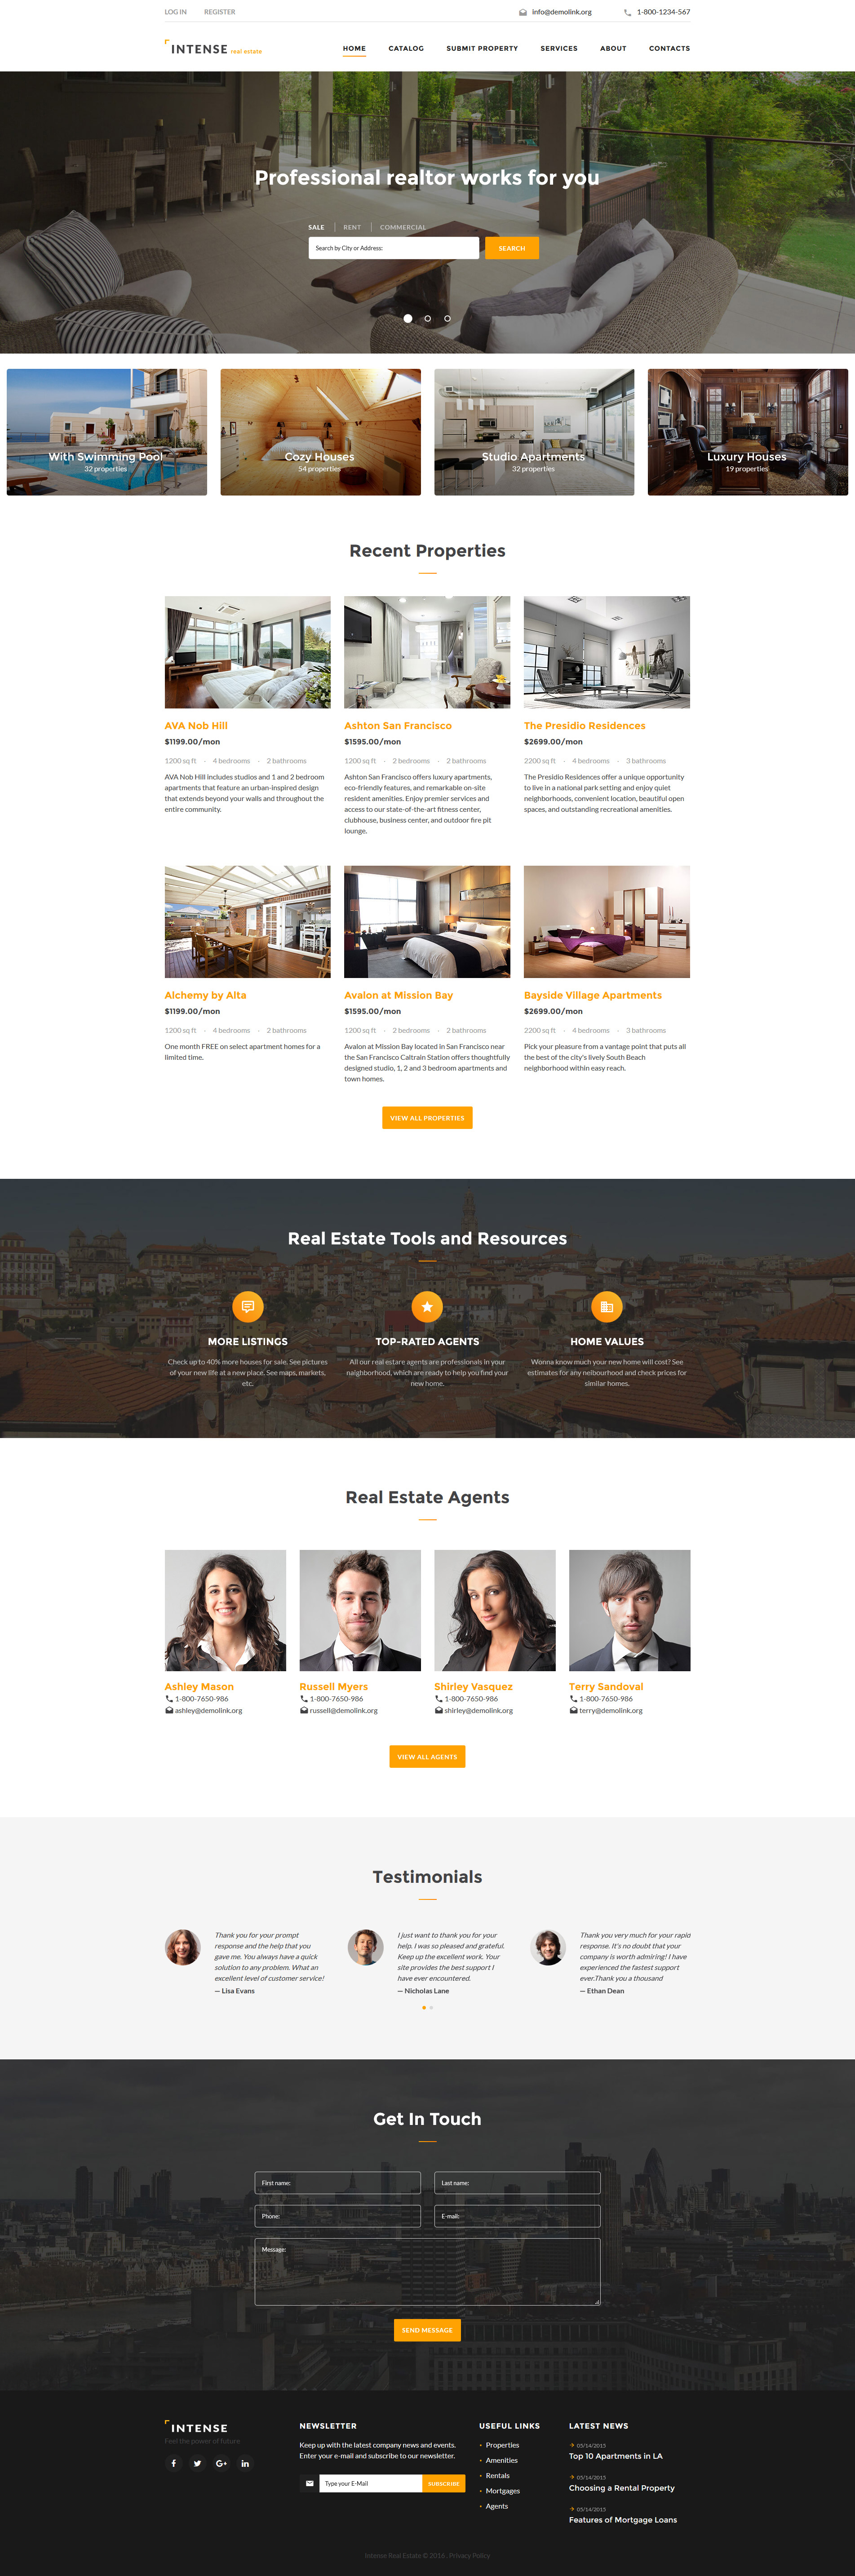 15 Best Free Real Estate Templates